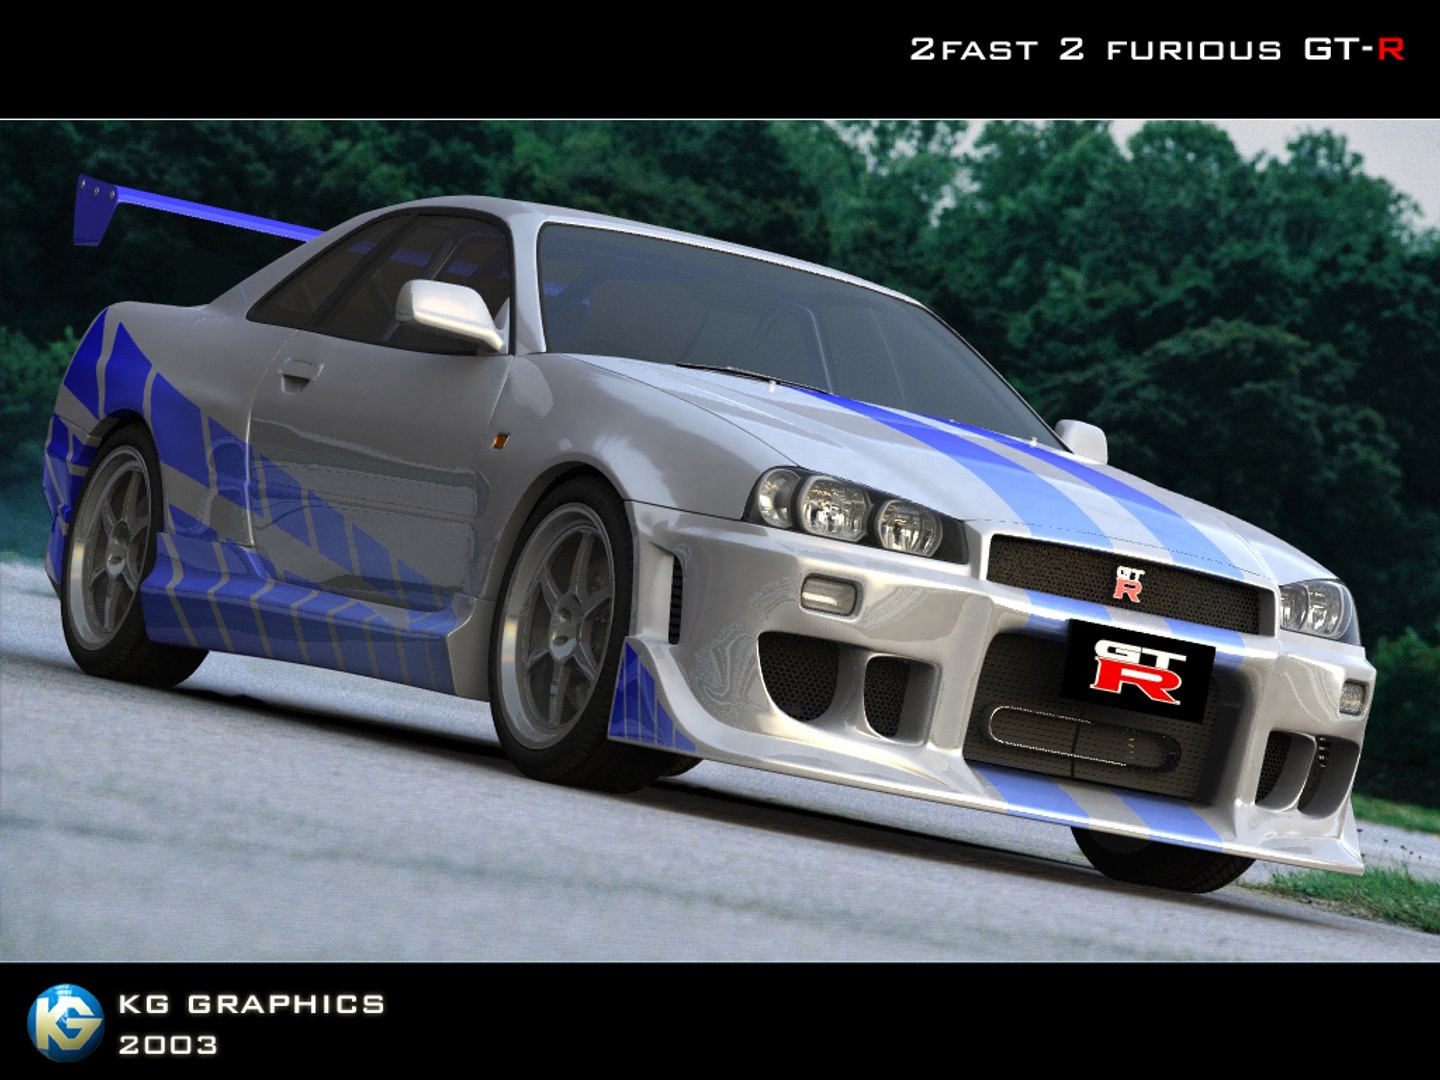 Nissan Skyline GT-R R34 Replica of 2 Fast 2 Furious Movie Car Editorial  Stock Photo - Image of famous, aftermarket: 258505628